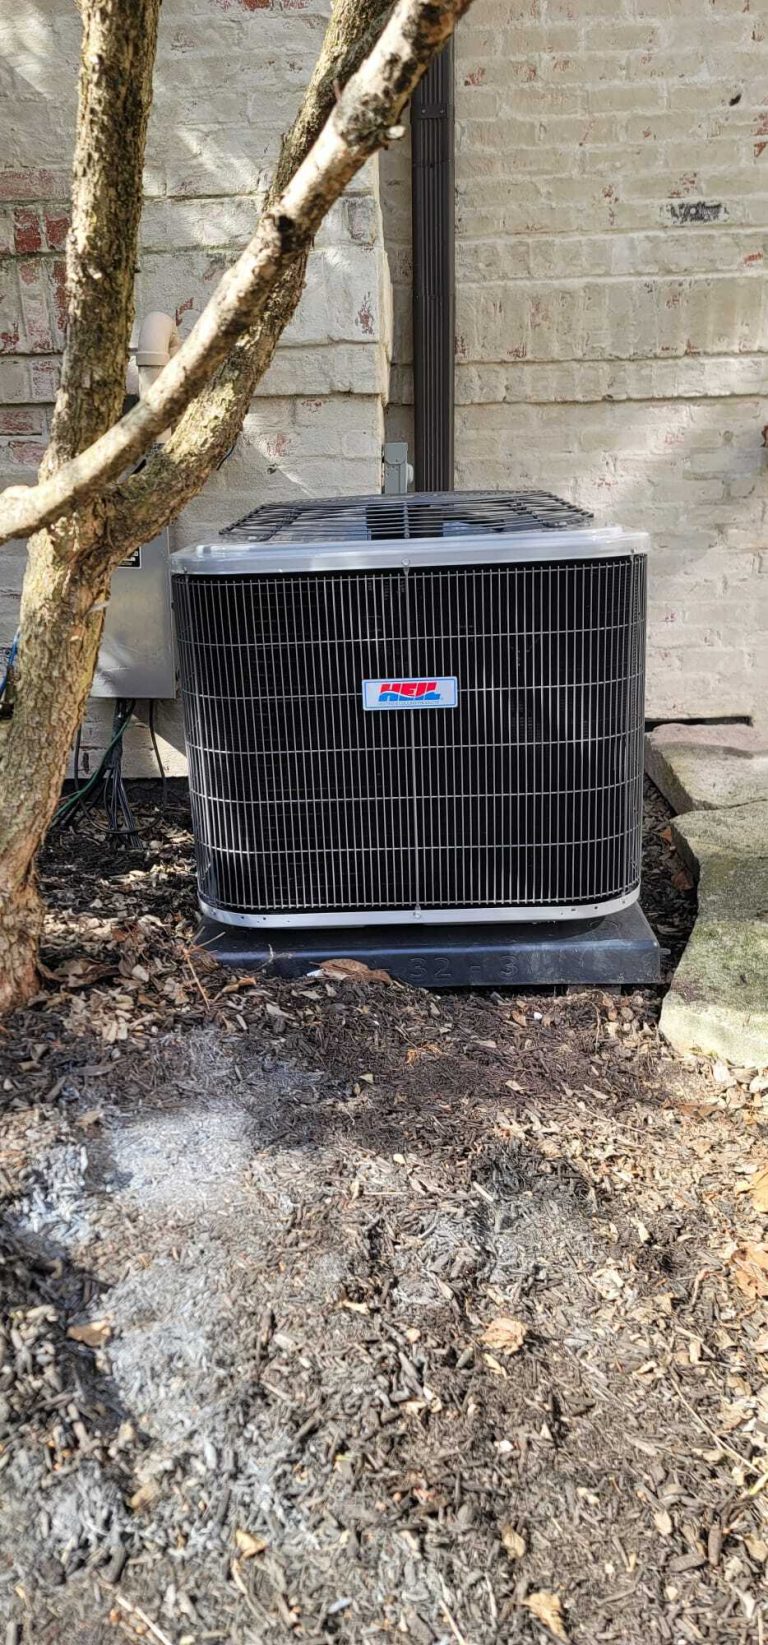 Anderson Indiana Furnace Repair to AC checkups